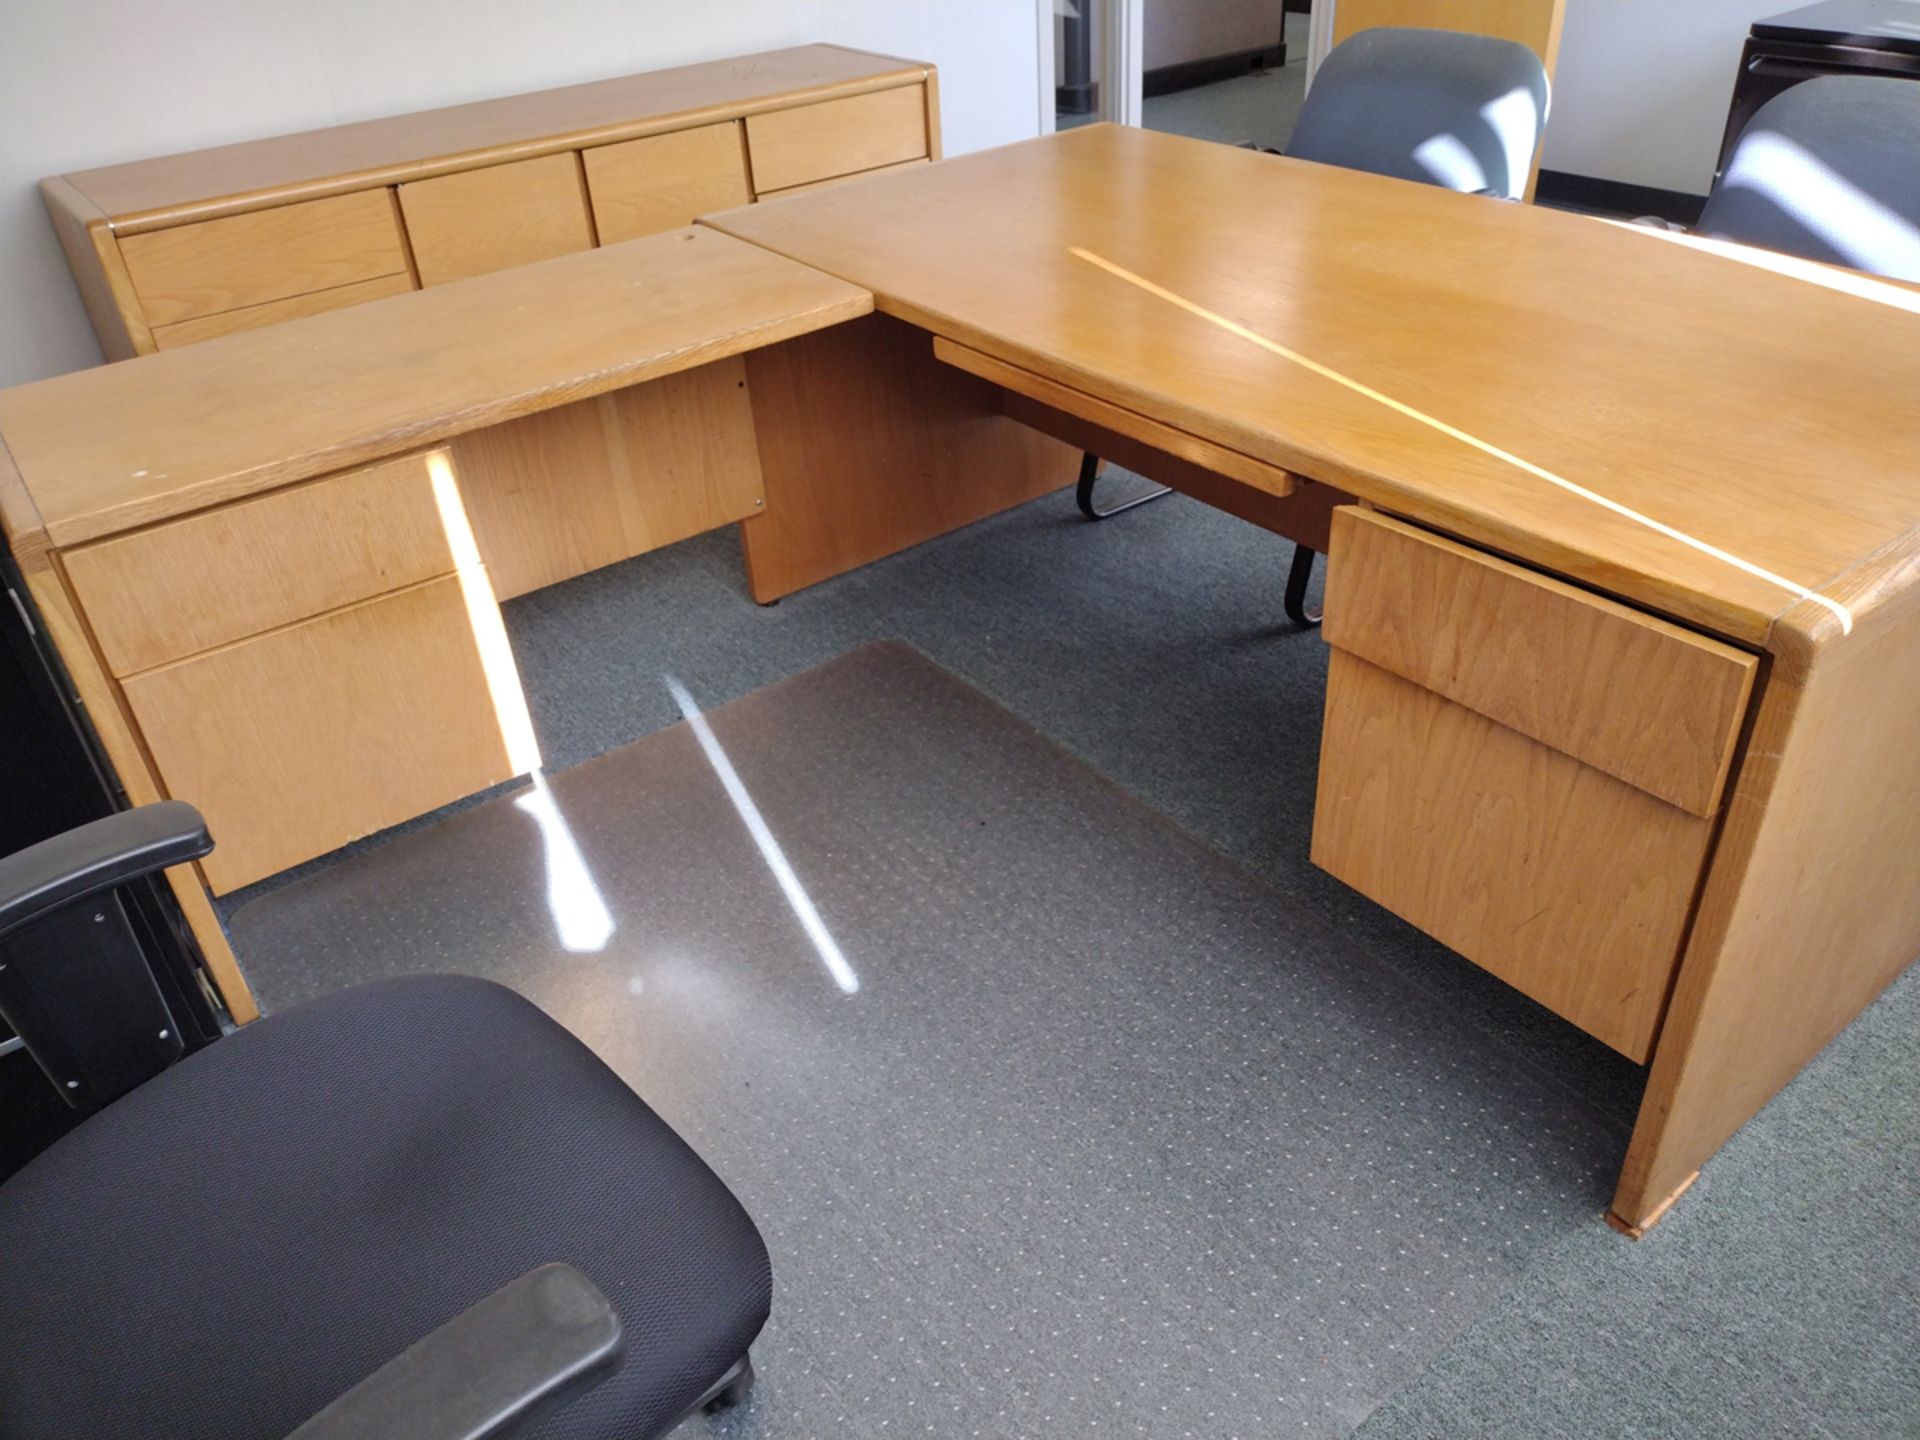 Group of Office Furniture Throughout Rooms - Image 7 of 8